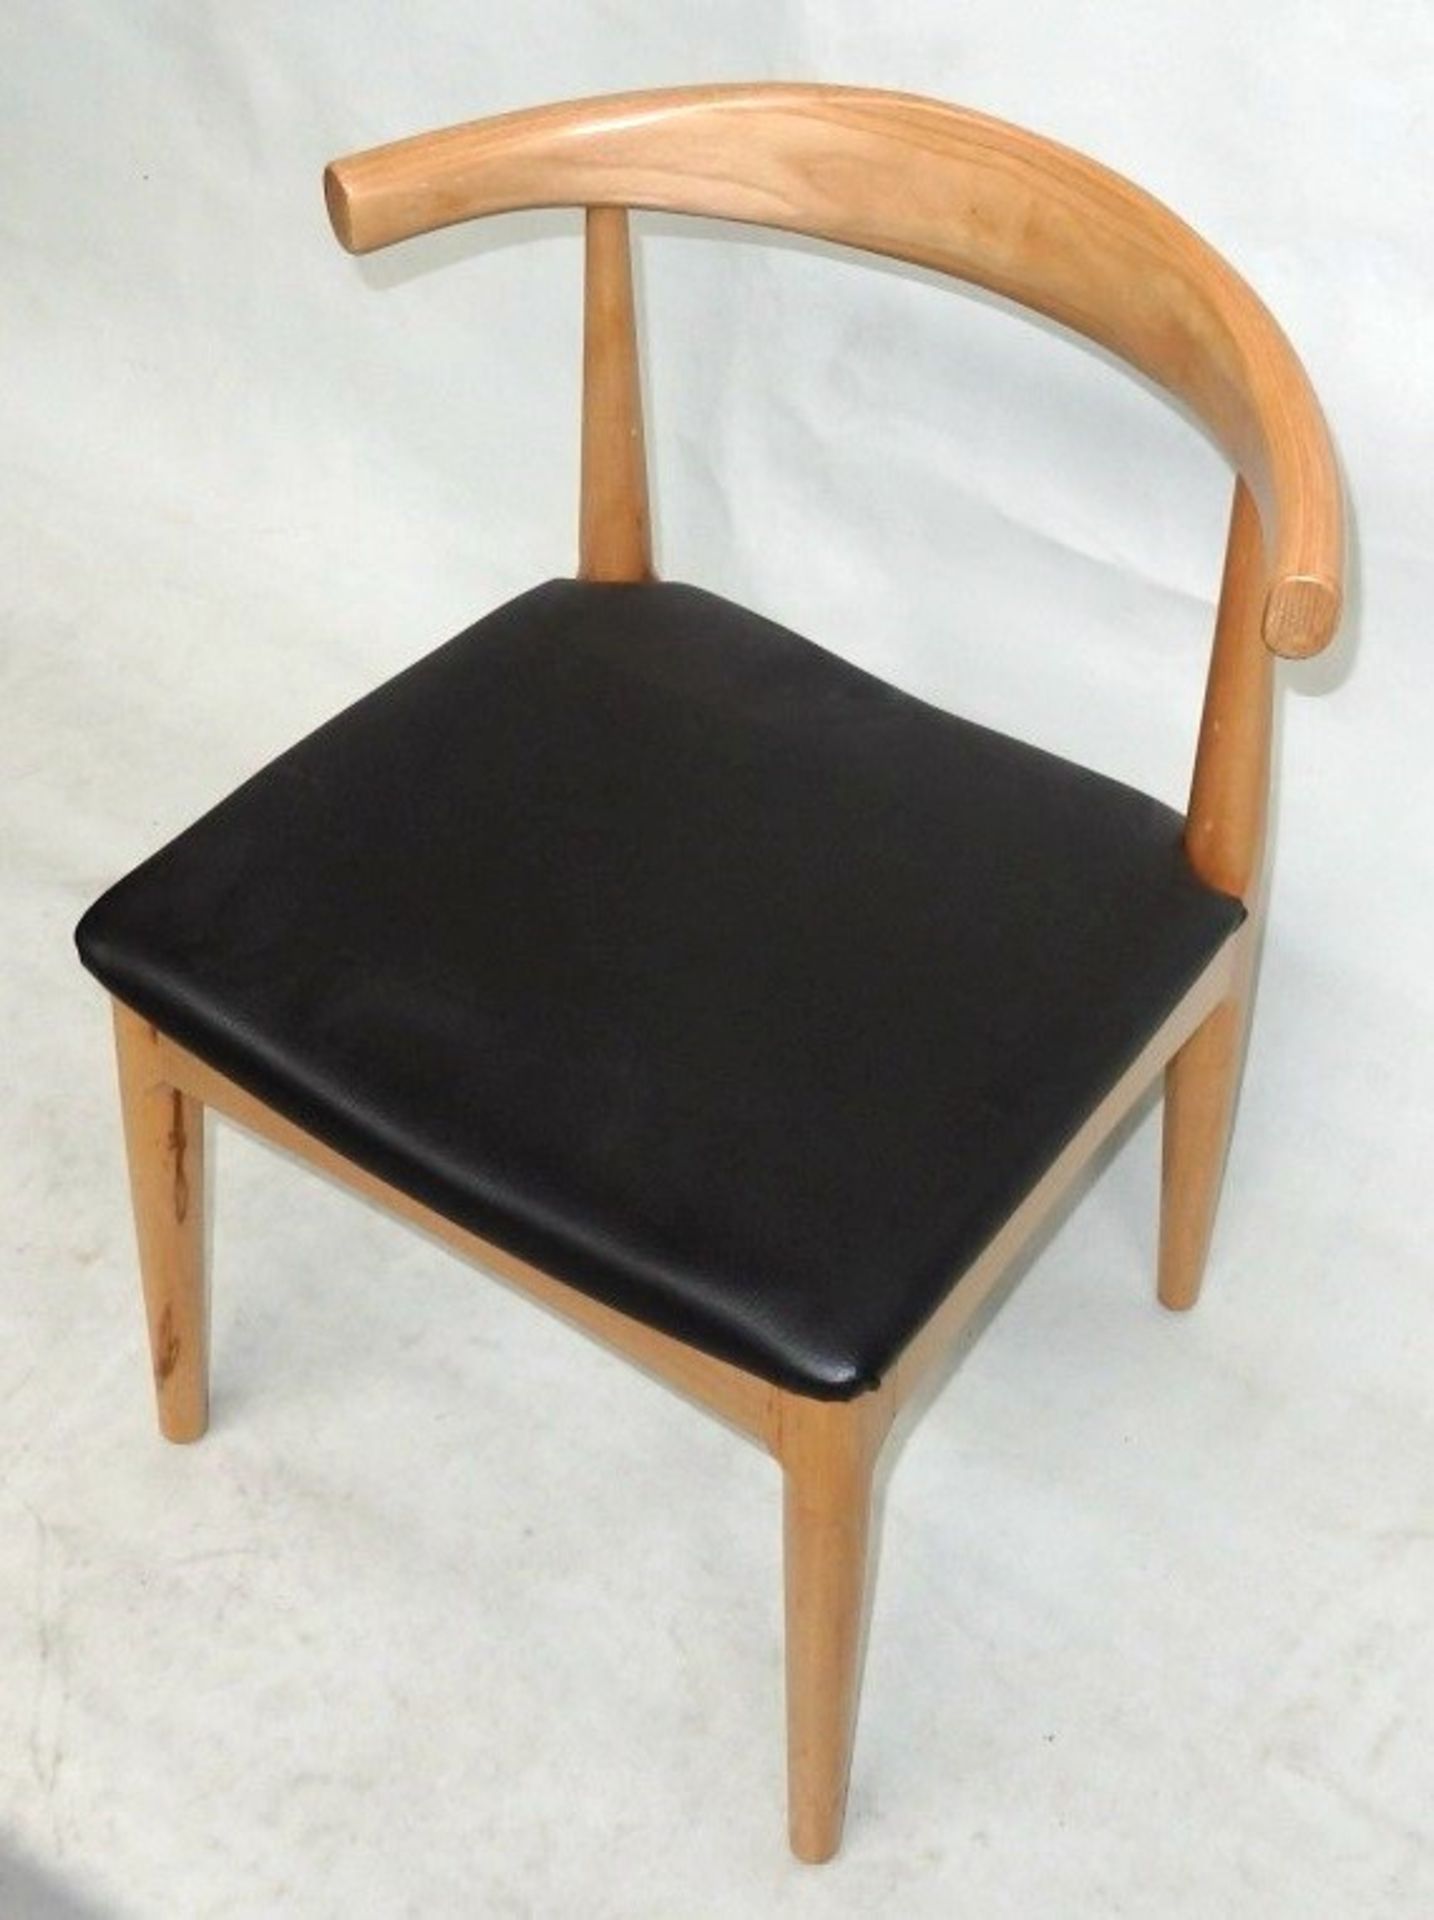 1 x Curved Back Wooden Chair With Leather Upholstered Seat - Dimensions: W47 x D45 x H78 cm - Ref: - Image 3 of 6